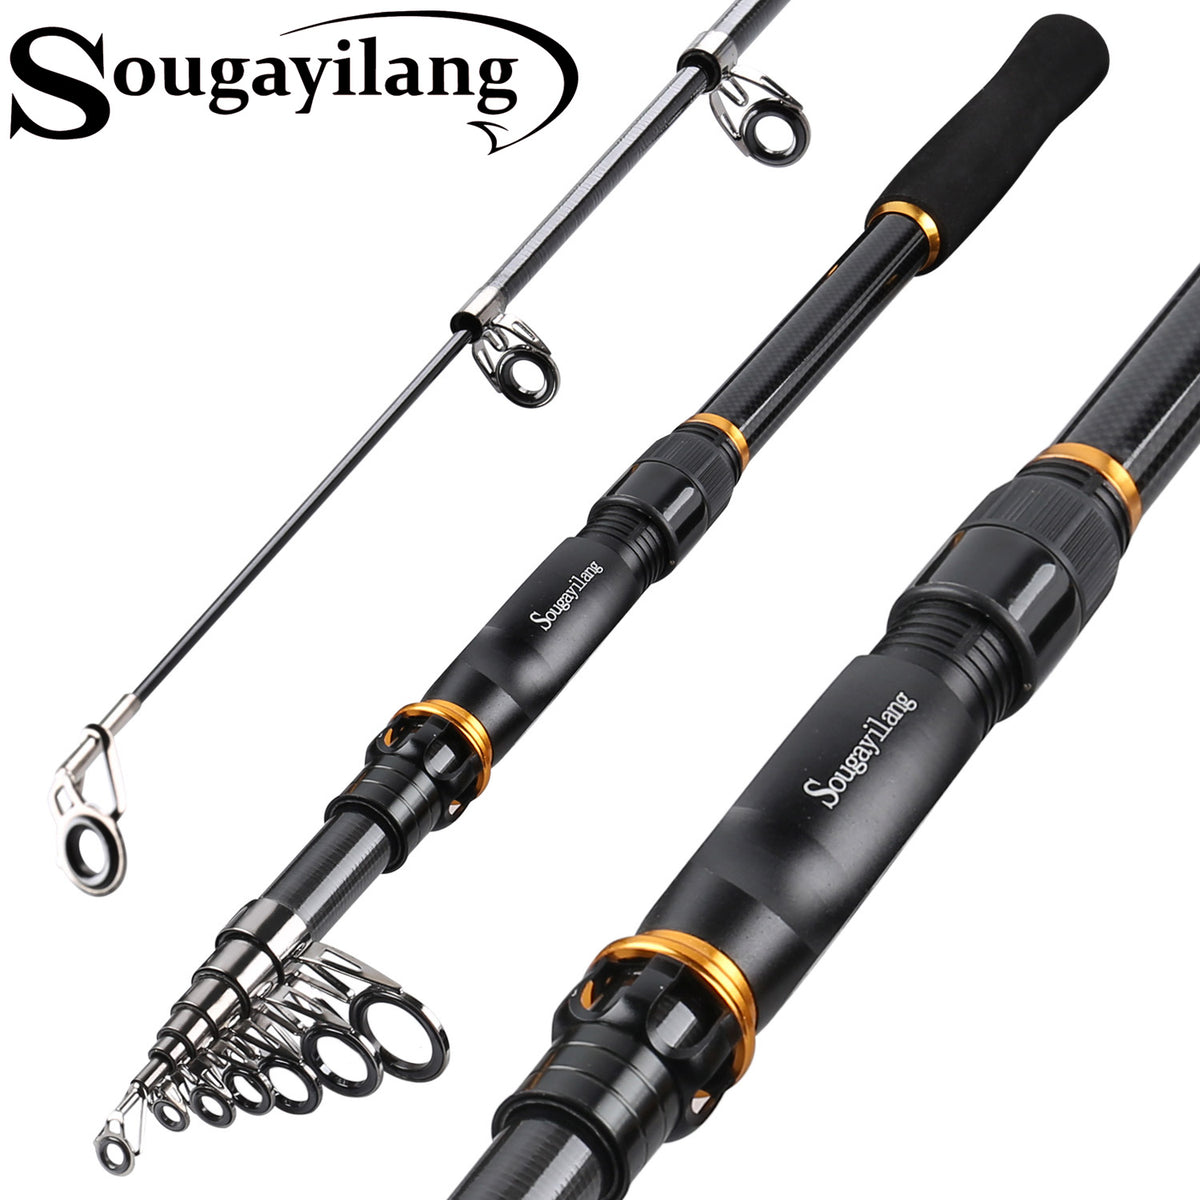 Sougayilang Telescopic Fishing Rod with CNC Reel Seat, Portable Retractable  Rod, Travel Fishing Pole for Bass Salmon Trout Fishing